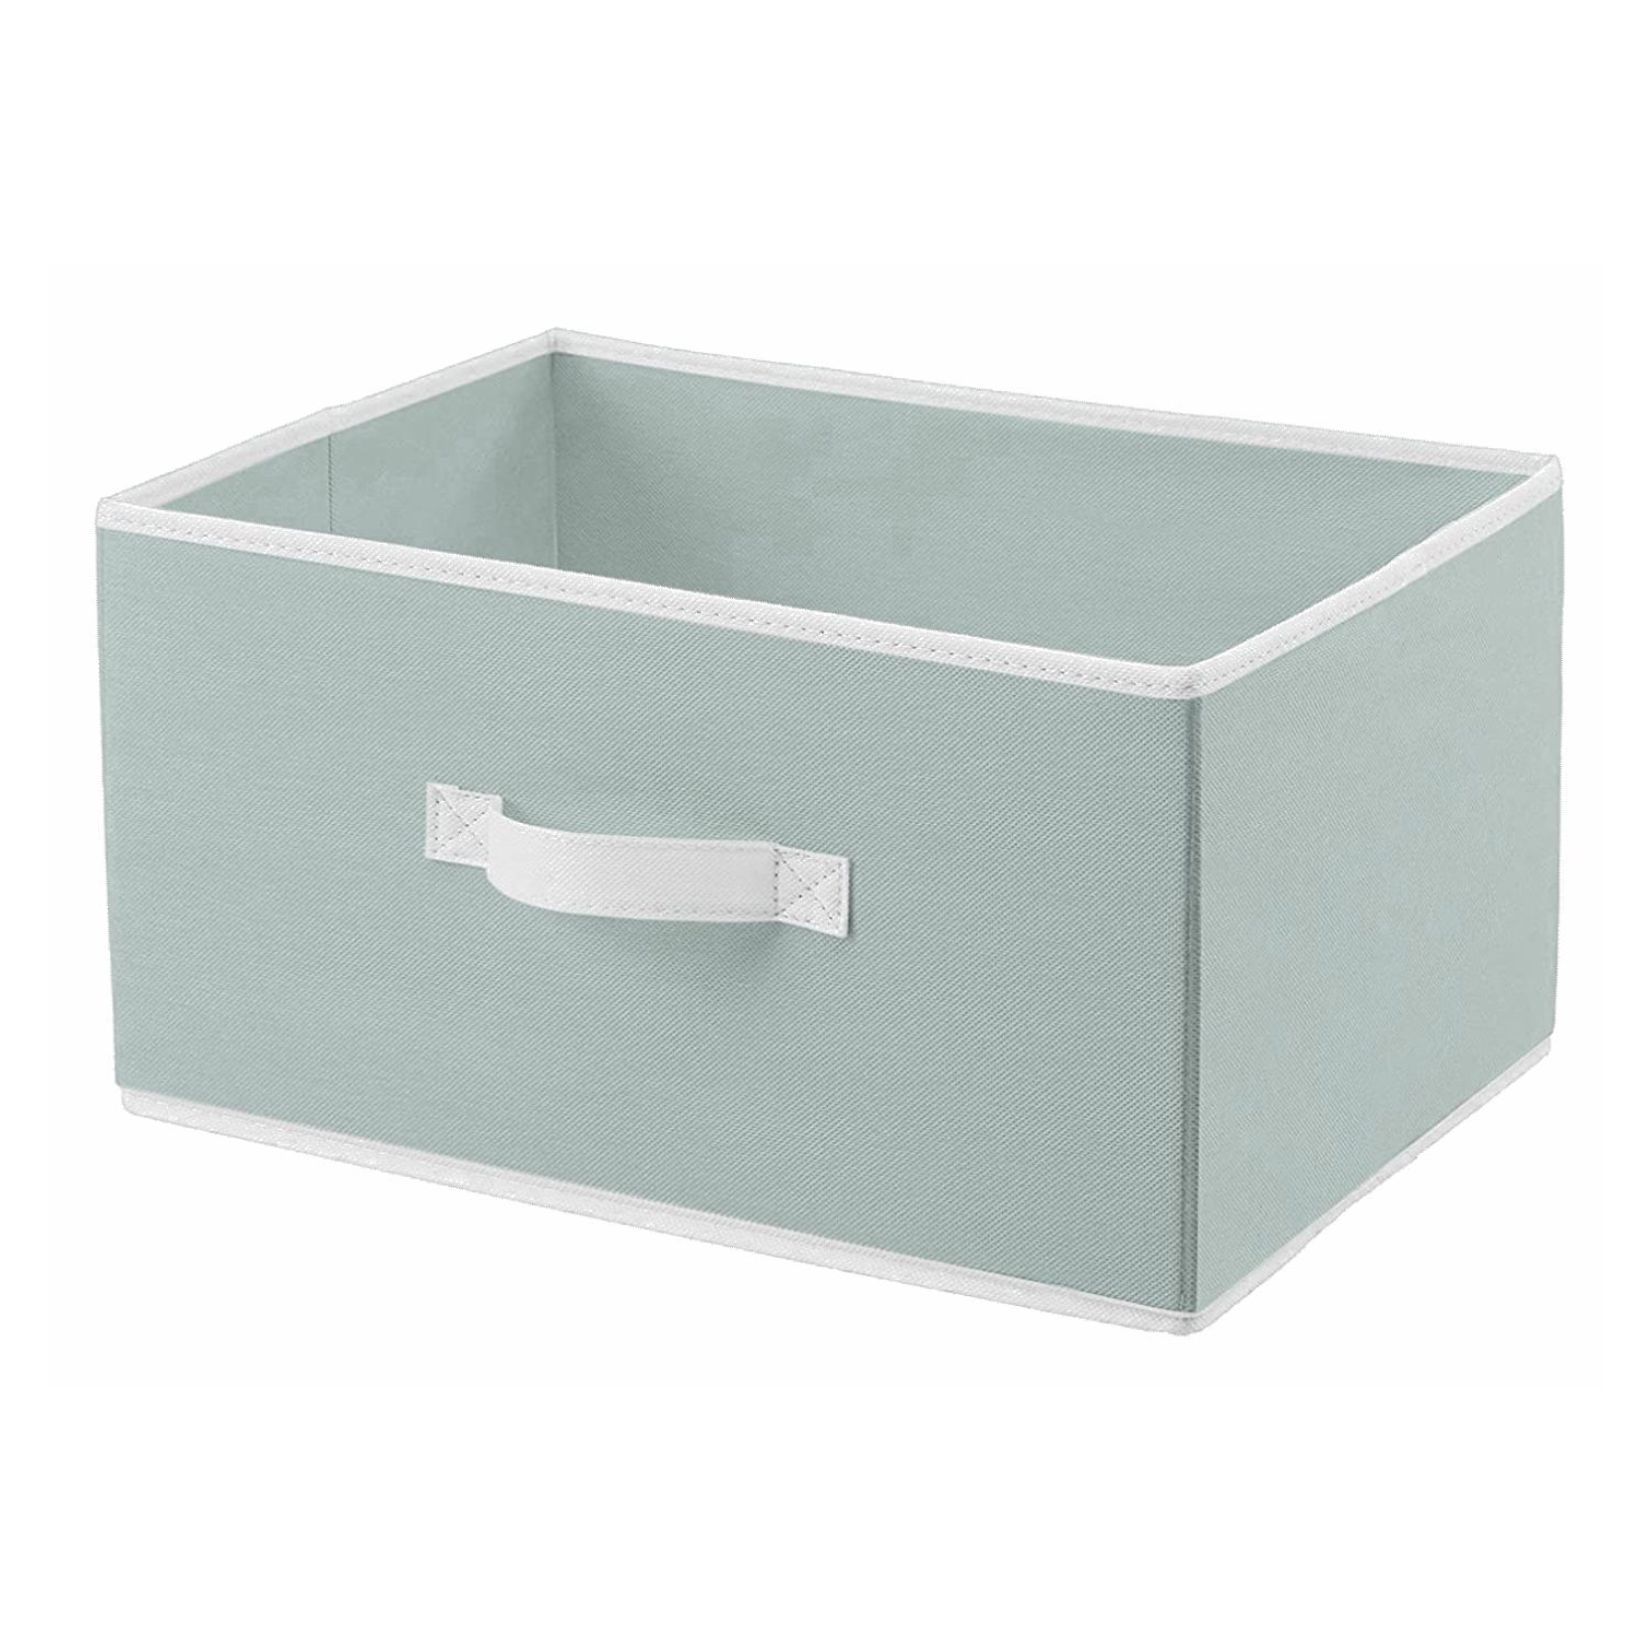     			HOMETALES - Storage Boxes & Baskets ( Pack of 1 )